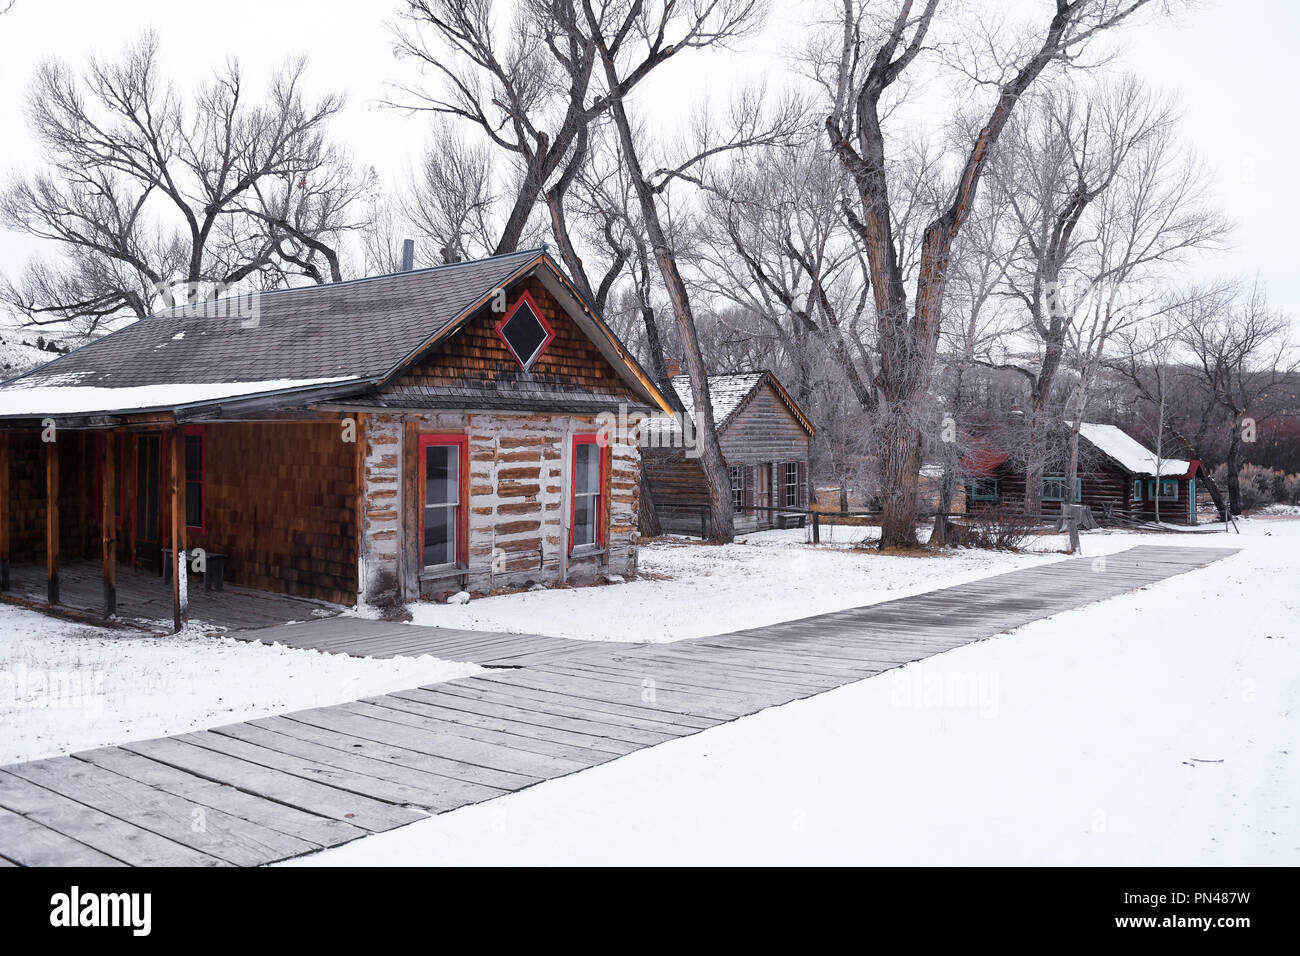 BANNACK, MONTANA, USA - December 15, 2017: Old rustic buildings in winter at Bannack Historic State Park Stock Photo